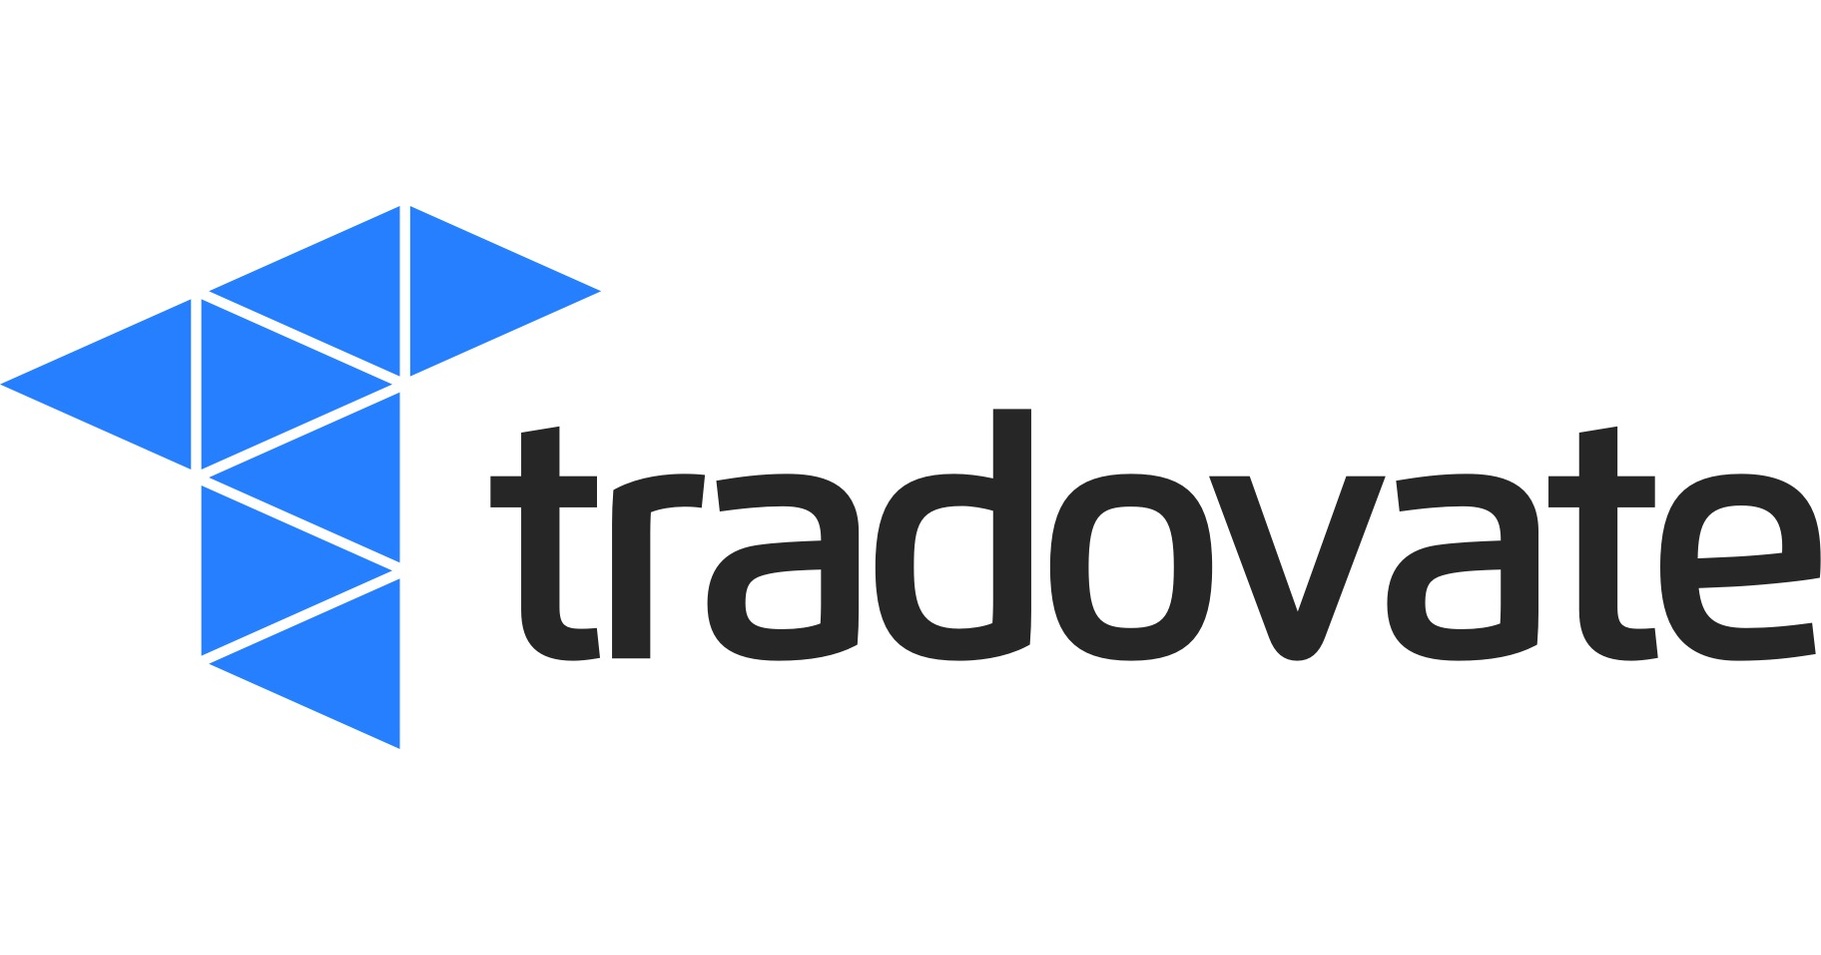 20-facts-about-tradovate